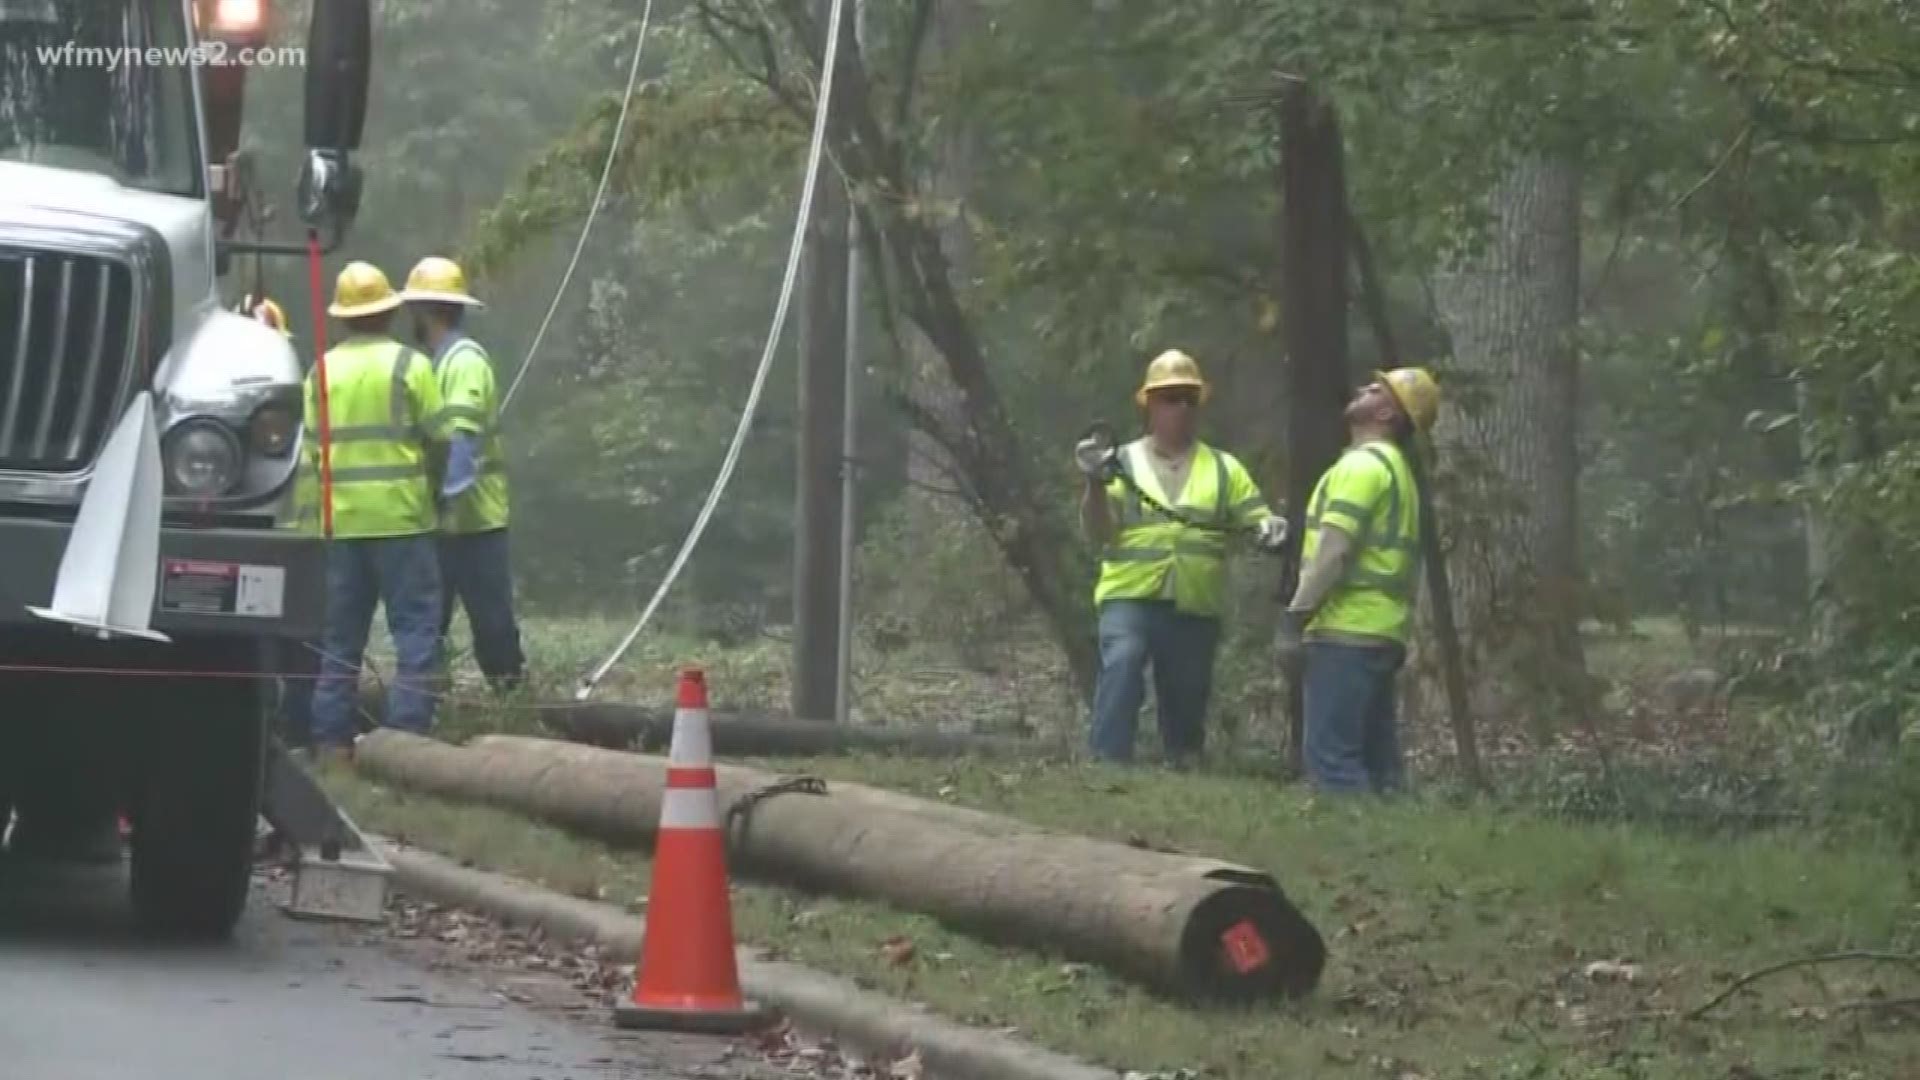 More than 12 thousand duke energy customers are without power in Guilford County.